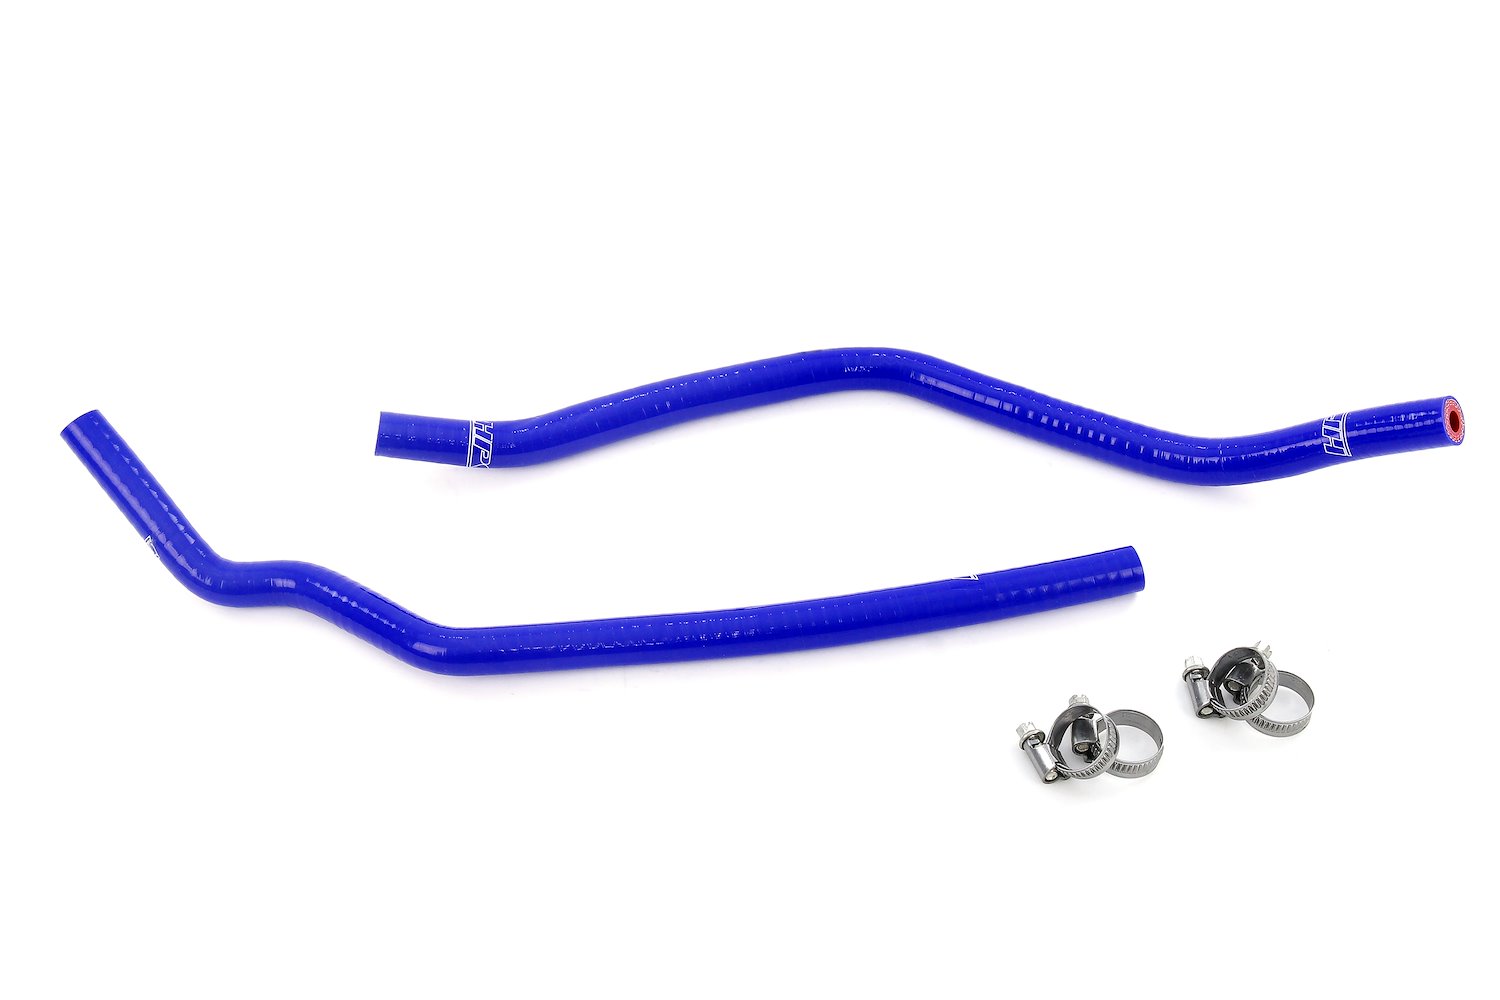 57-2119-BLUE Coolant Hose Kit, 3-Ply Reinforced Silicone, Replaces Rubber Coolant Tank Supply Hoses